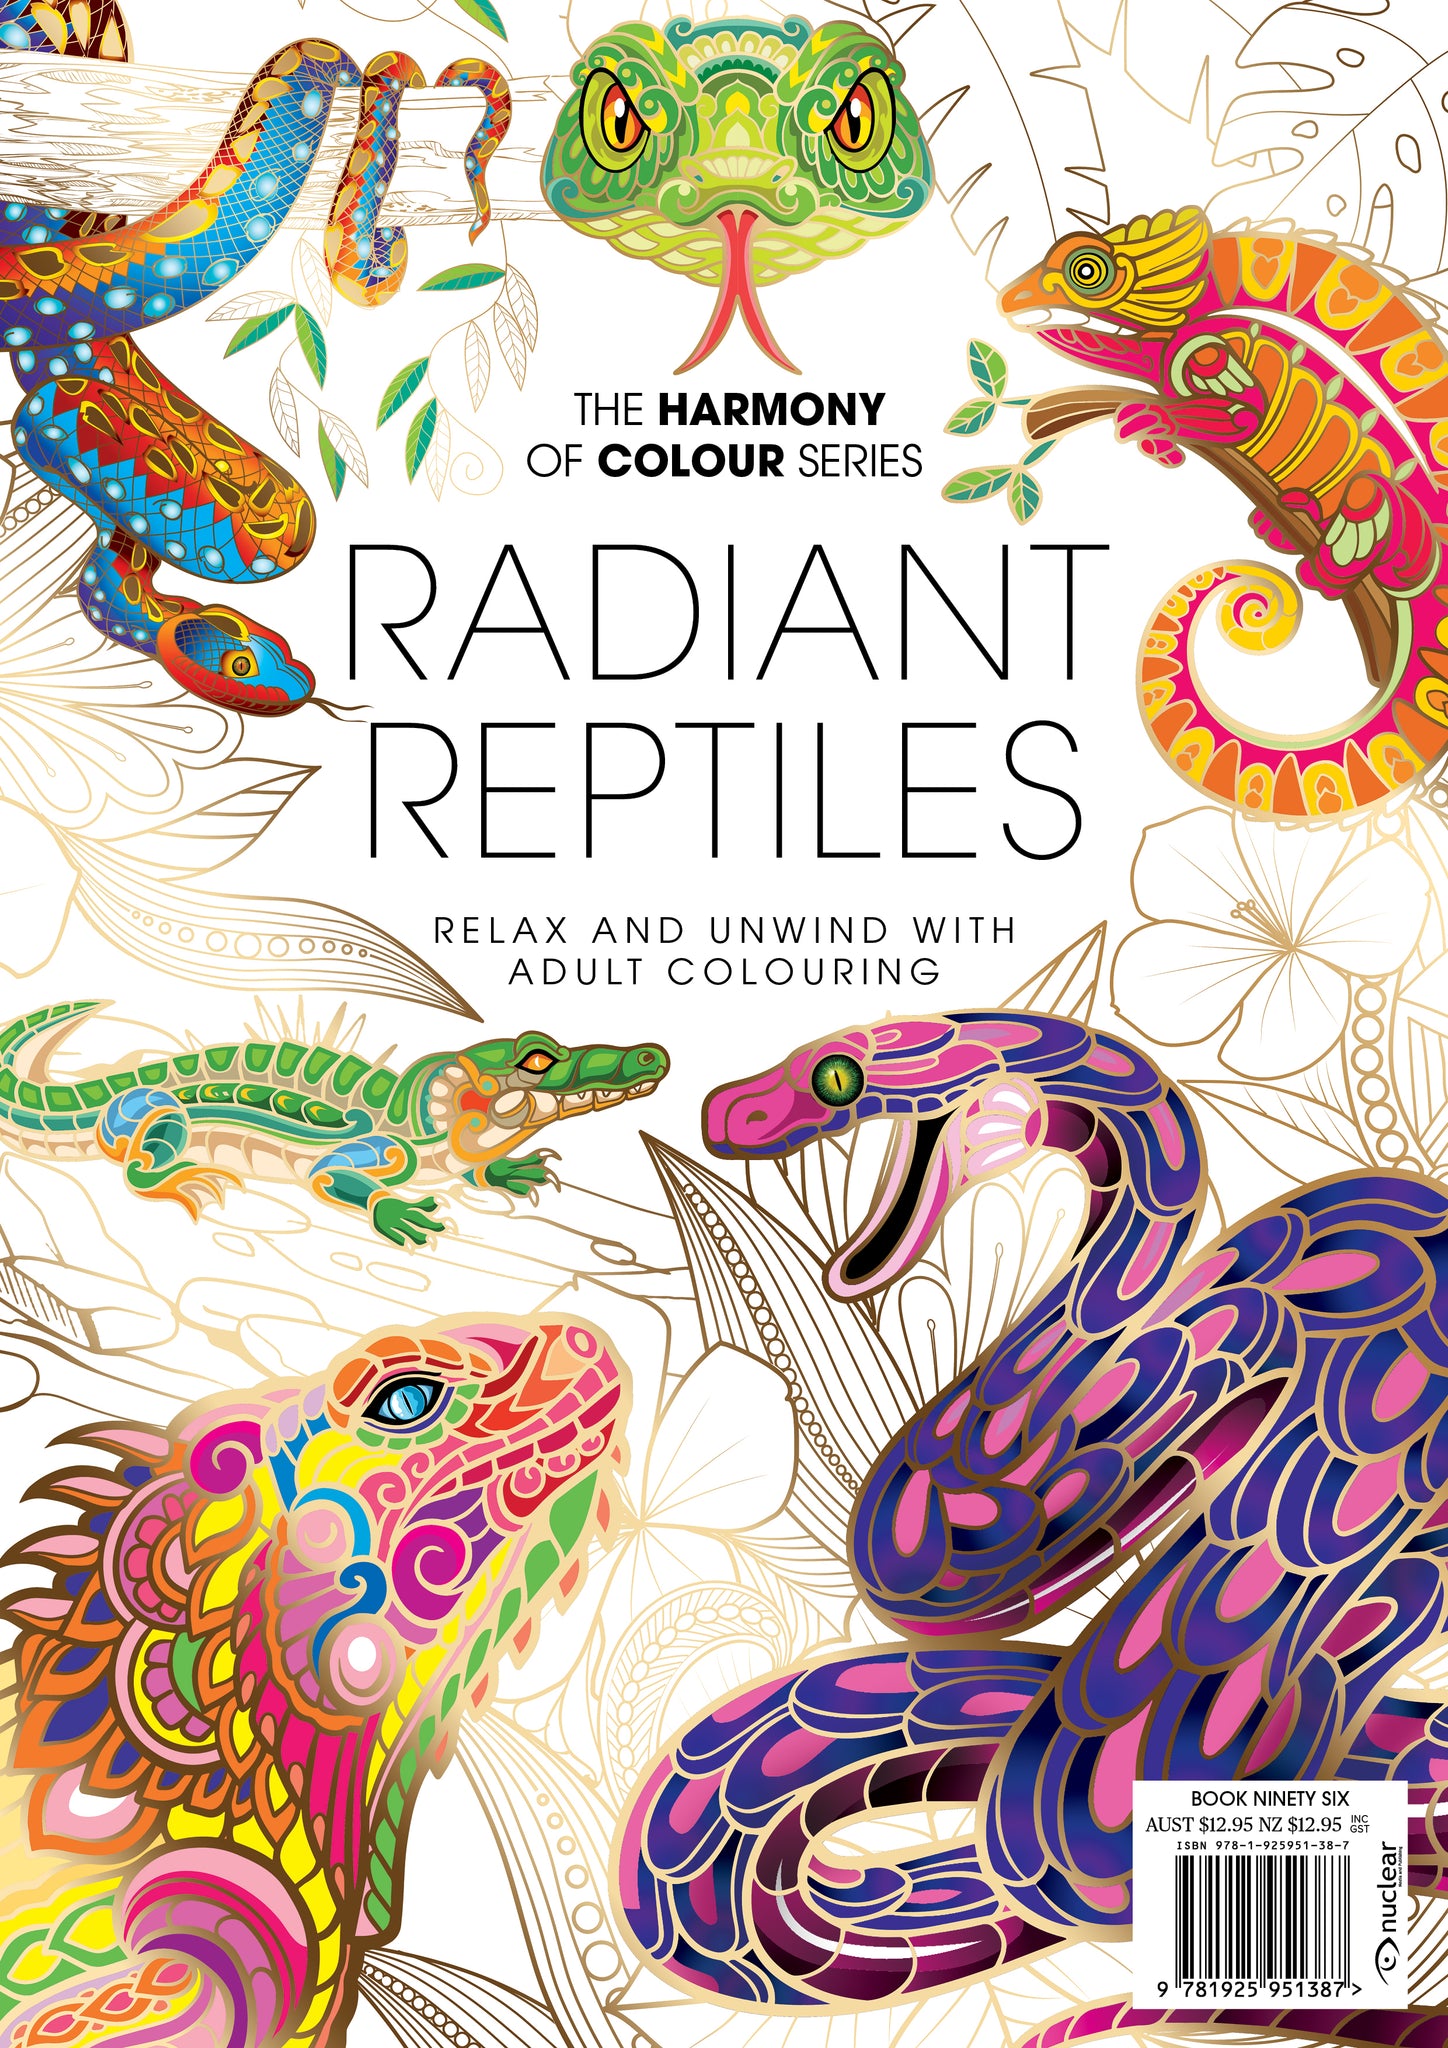 096. Harmony of Colour Book Ninety Six: Radiant Reptiles (PRINTABLE DIGITAL EDITION ALSO AVAILABLE!)